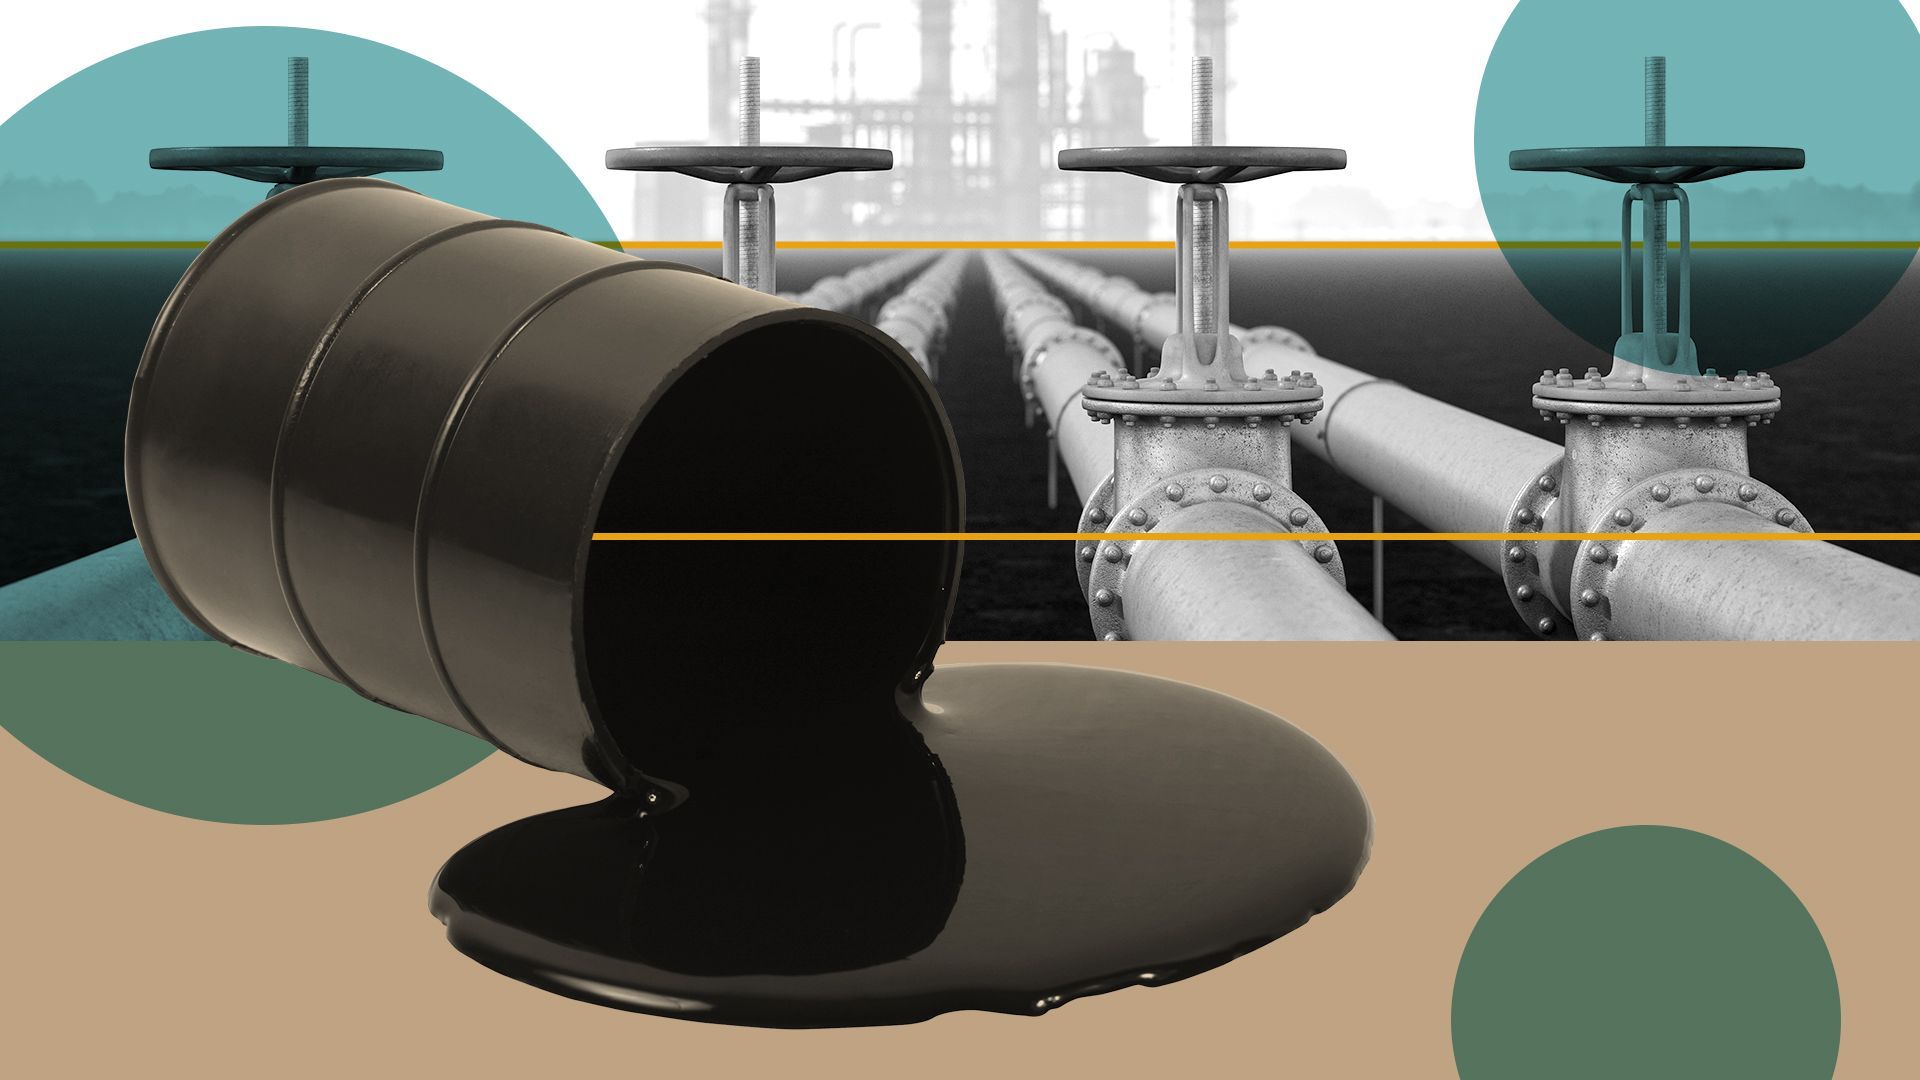 Photo illustration of oil spilling out of a barrel, oil pipelines and abstract shapes.